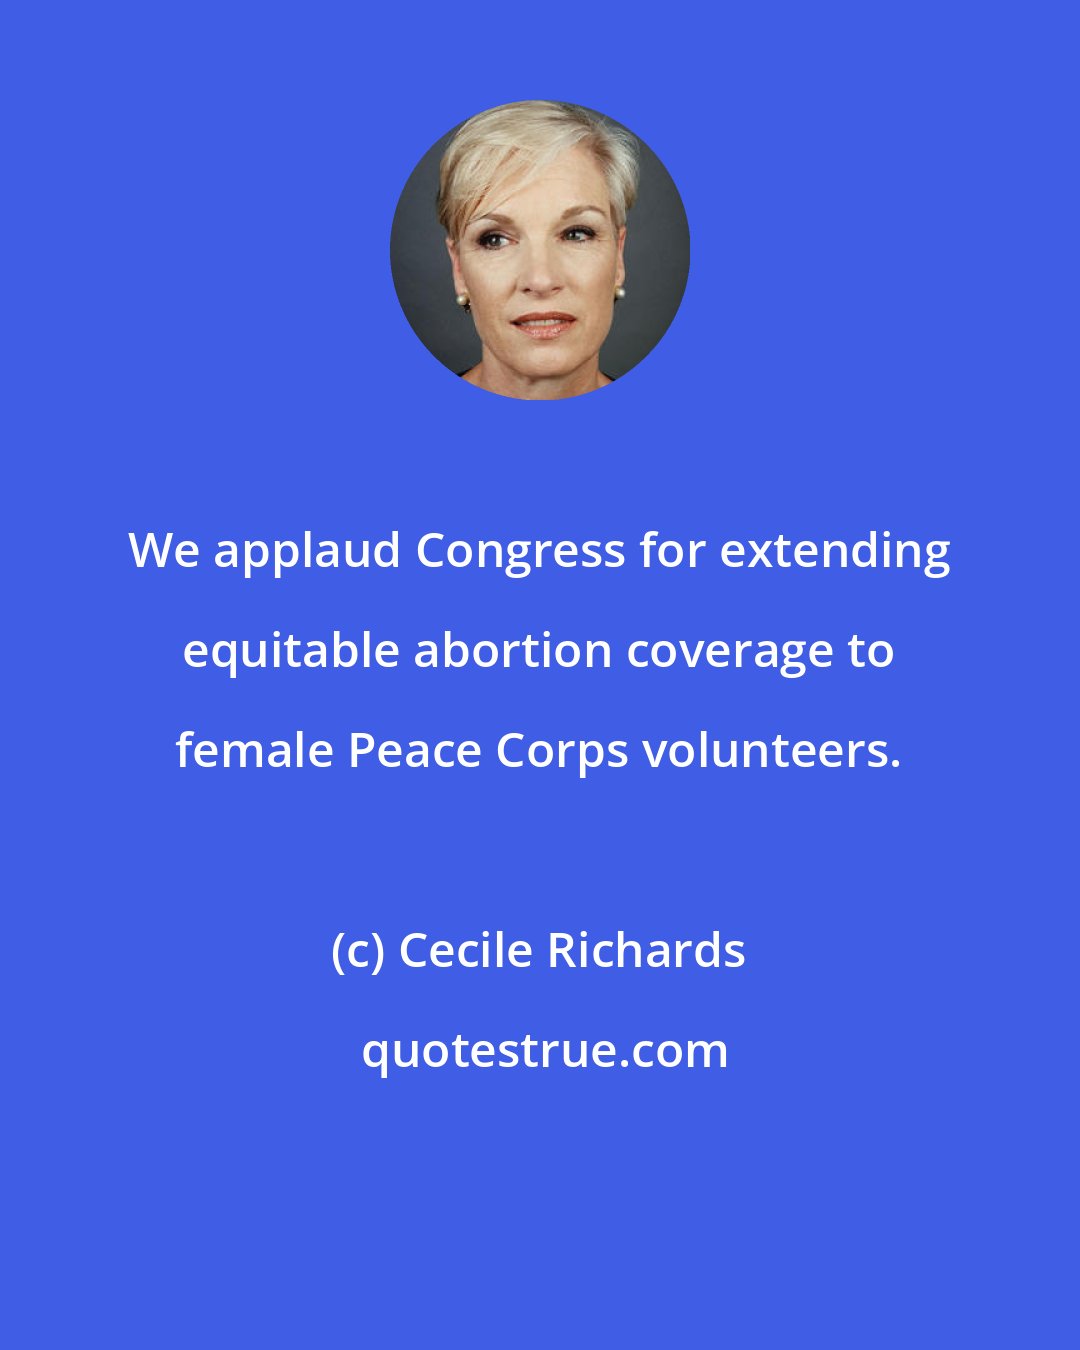 Cecile Richards: We applaud Congress for extending equitable abortion coverage to female Peace Corps volunteers.